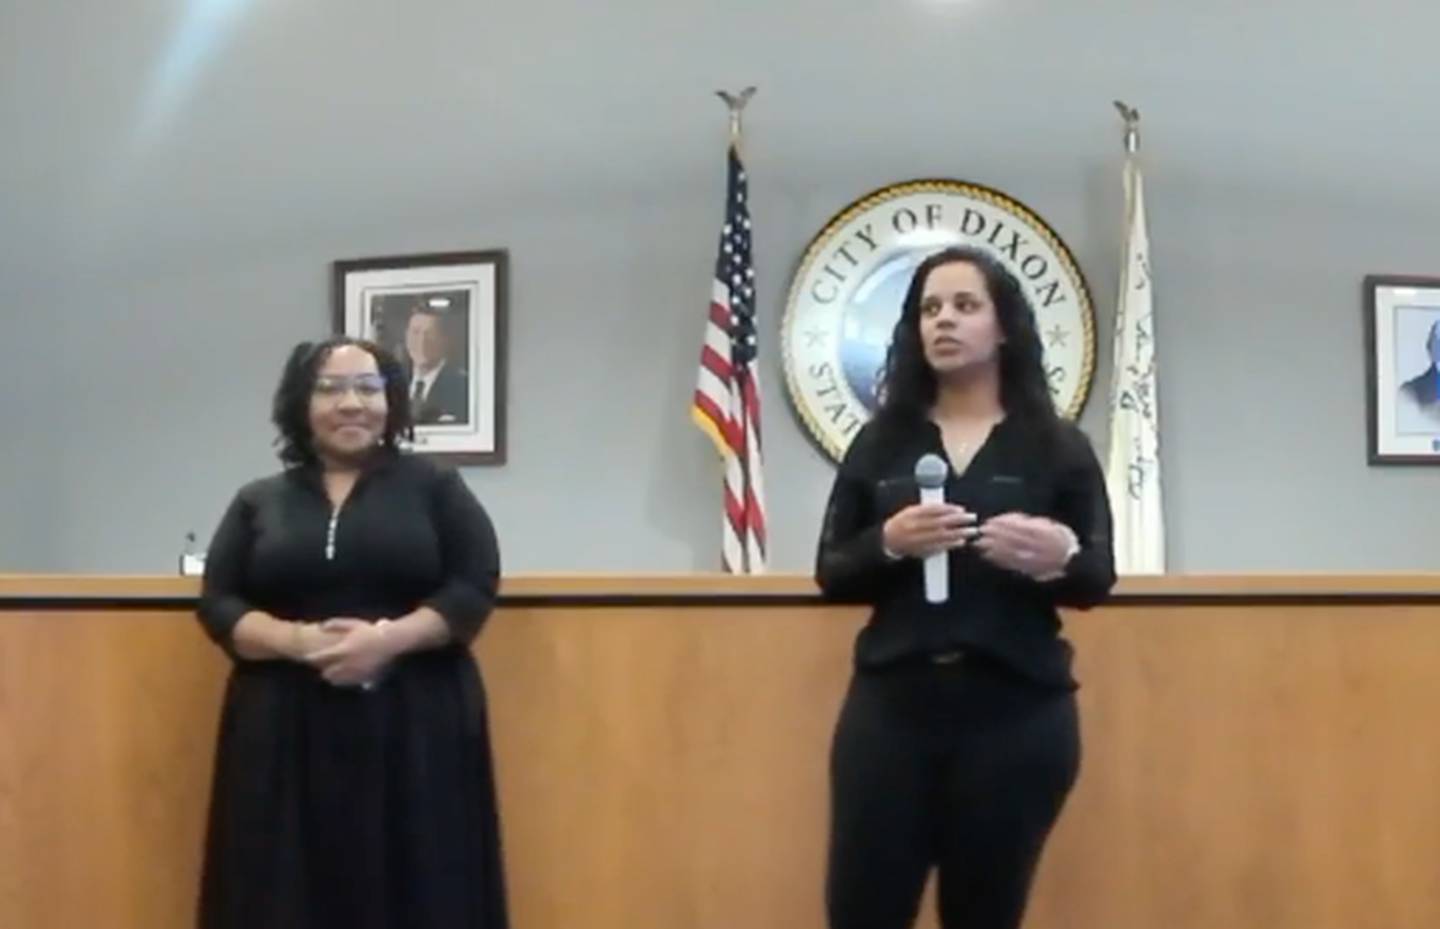 Jasmine Siddiqui (right) speaks to the crowd as Cecily White looks on as the two are named recipients of the Ike Mercer Certificate of Achievement Award on Tuesday, Feb. 20, at Dixon City Hall.